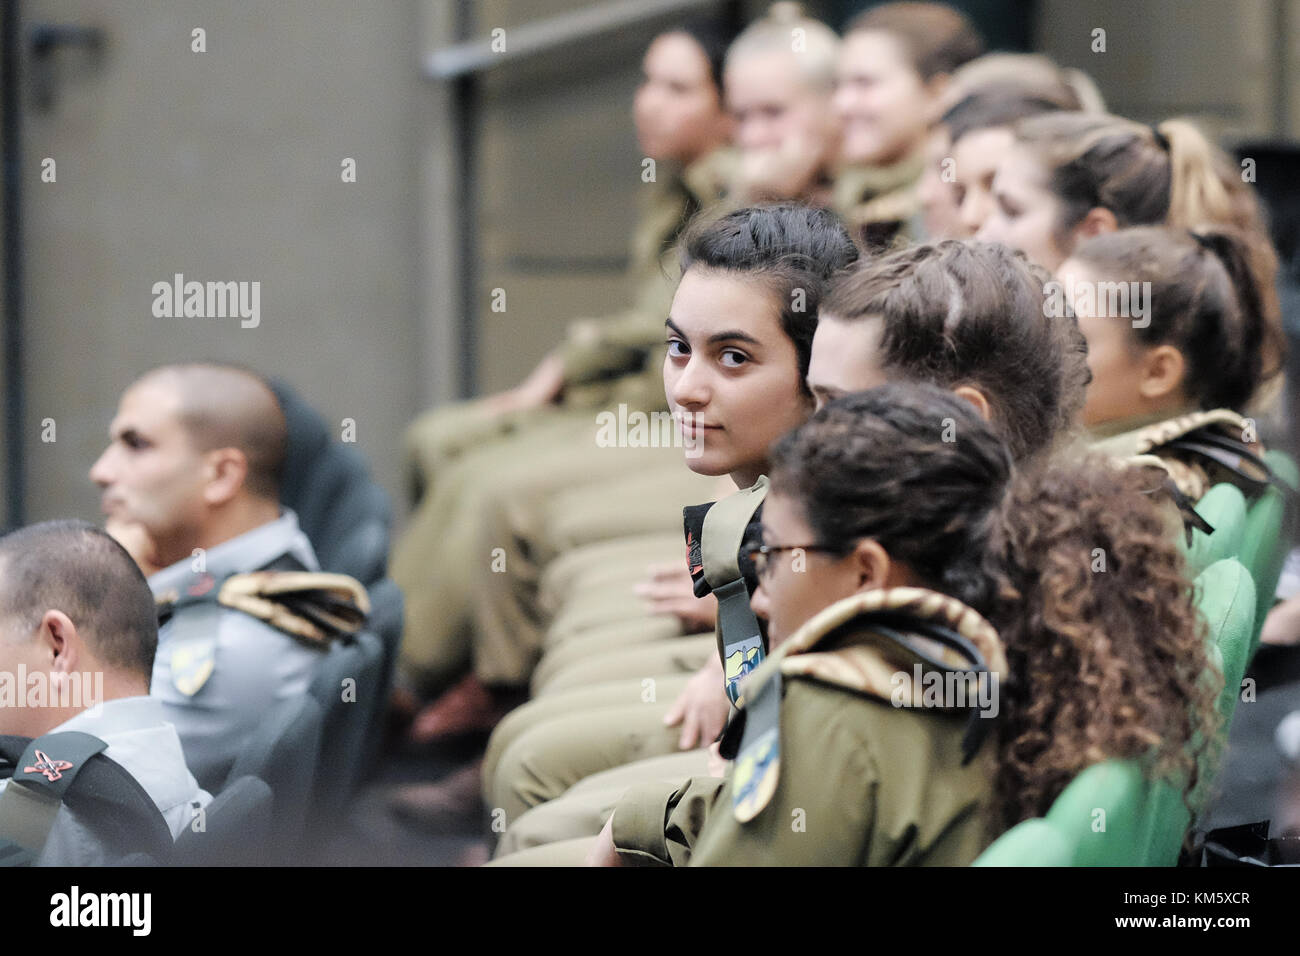 Latrun, Israel. 5th Dec, 2017. 13 female IDF soldiers graduate tank crew training at a ceremony at Yad LaShiryon, the Armored Corps Memorial Site at Latrun. These are the first women to serve in the Armored Corps as part of a pilot program. Having concluded tank training on Merkava Mark 3 tanks, female soldiers are destined to serve in the army's 80th Division, responsible for the southern Negev and Arava deserts, securing Israel's borders with Egypt and Jordan. Credit: Nir Alon/Alamy Live News Stock Photo